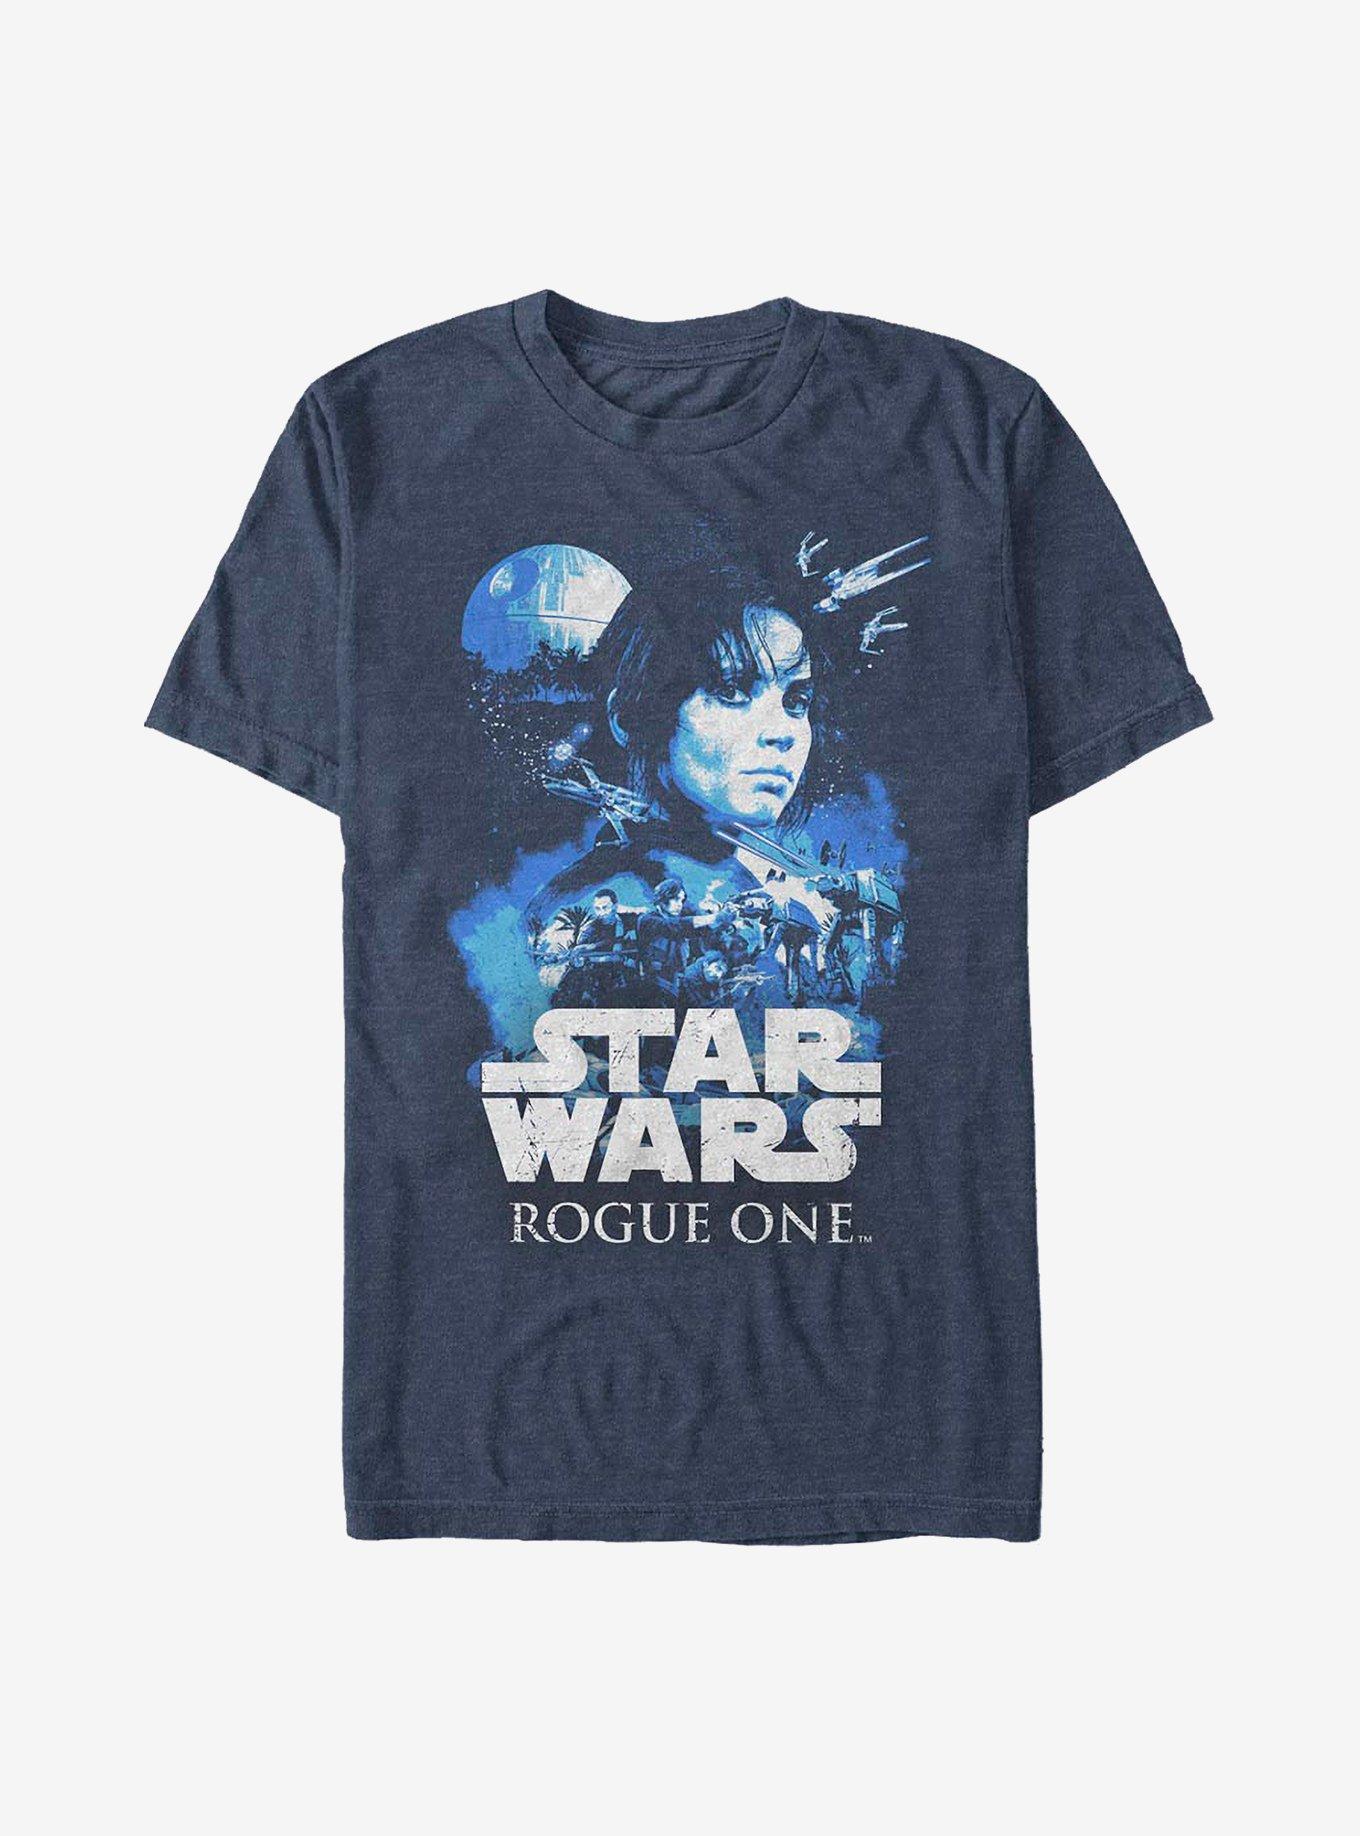 Star Wars Rogue One: A Star Wars Story Reflections T-Shirt, NAVY HTR, hi-res